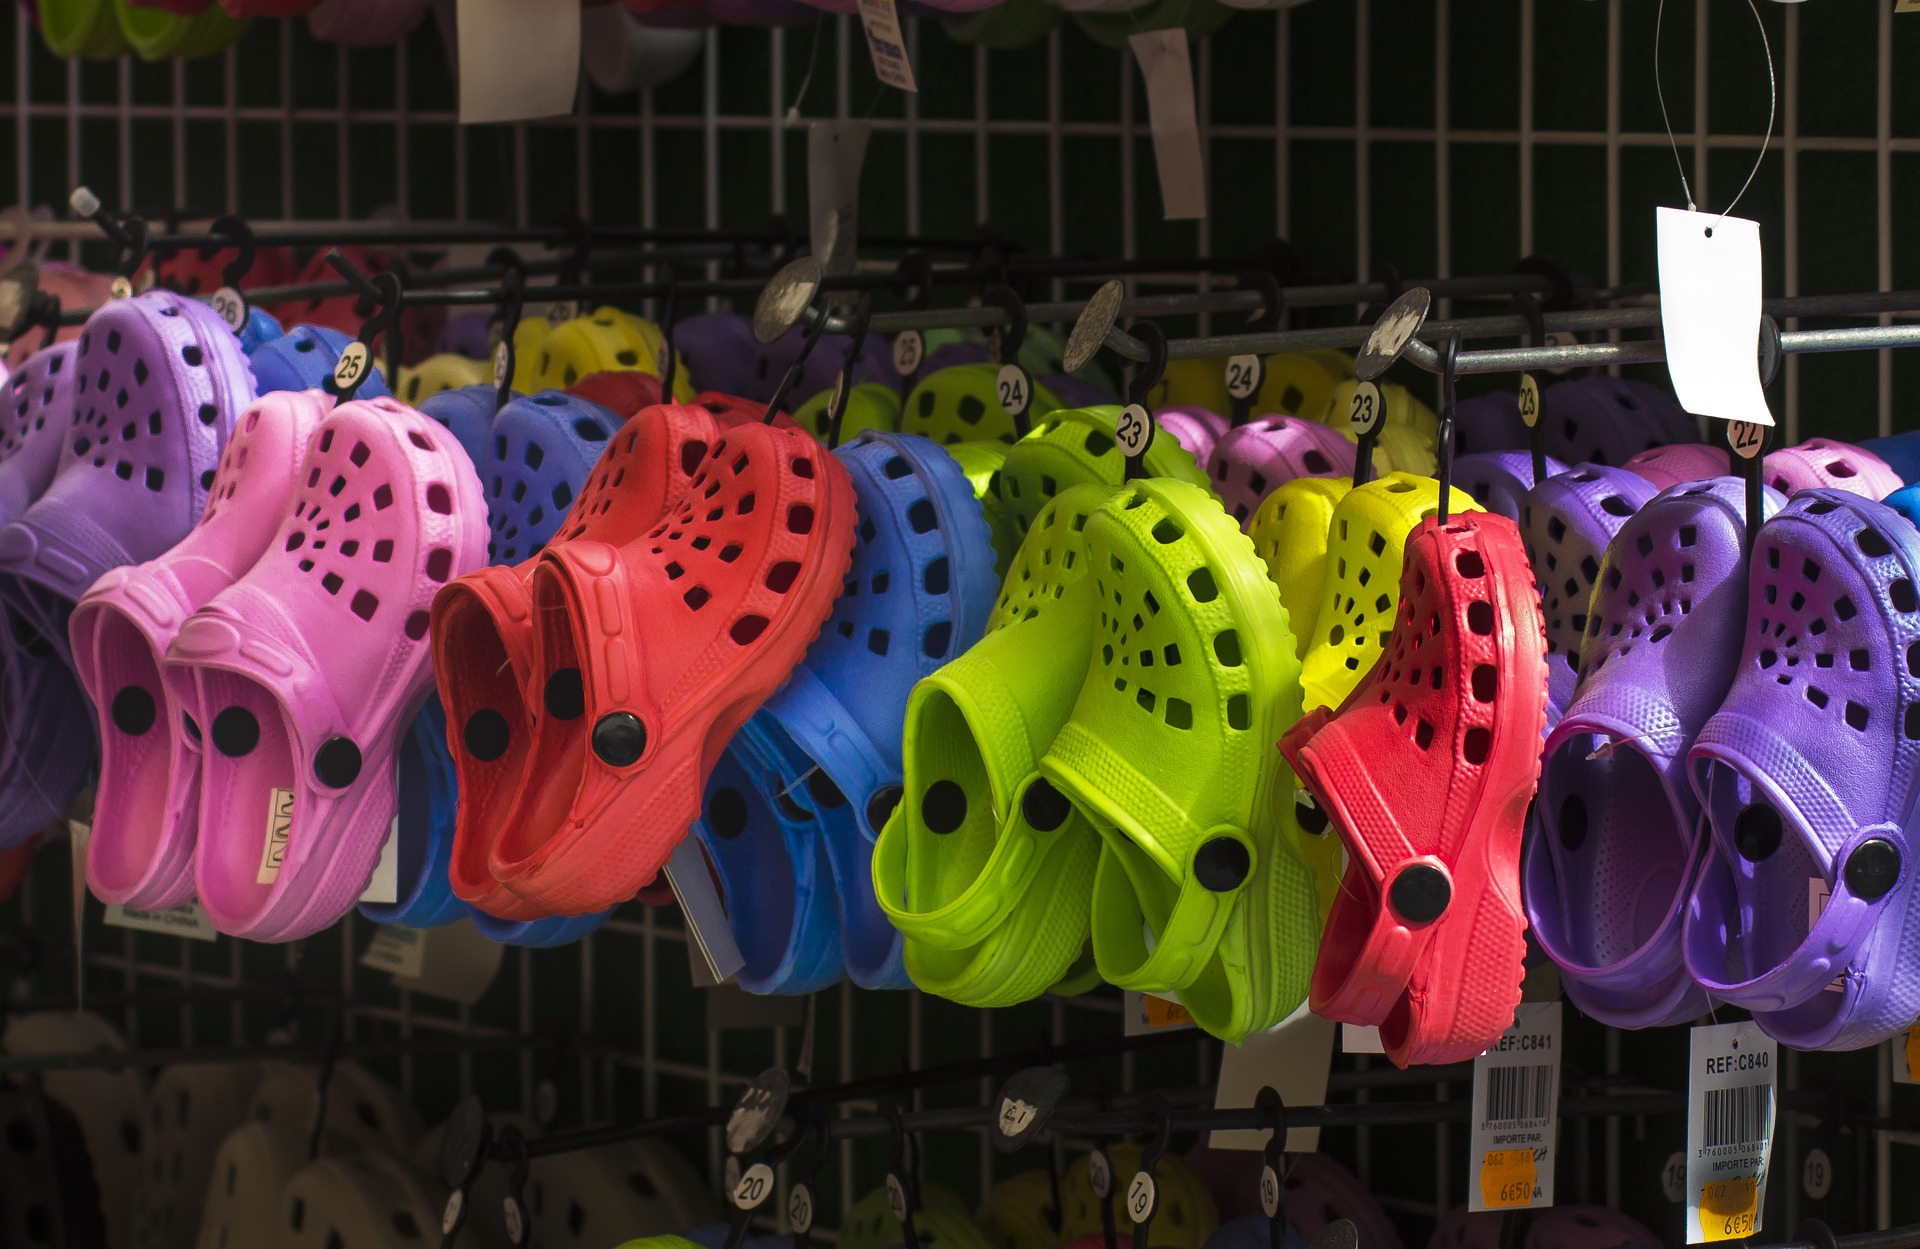 Colorful but extremely ugly plastic shoes: Crocs